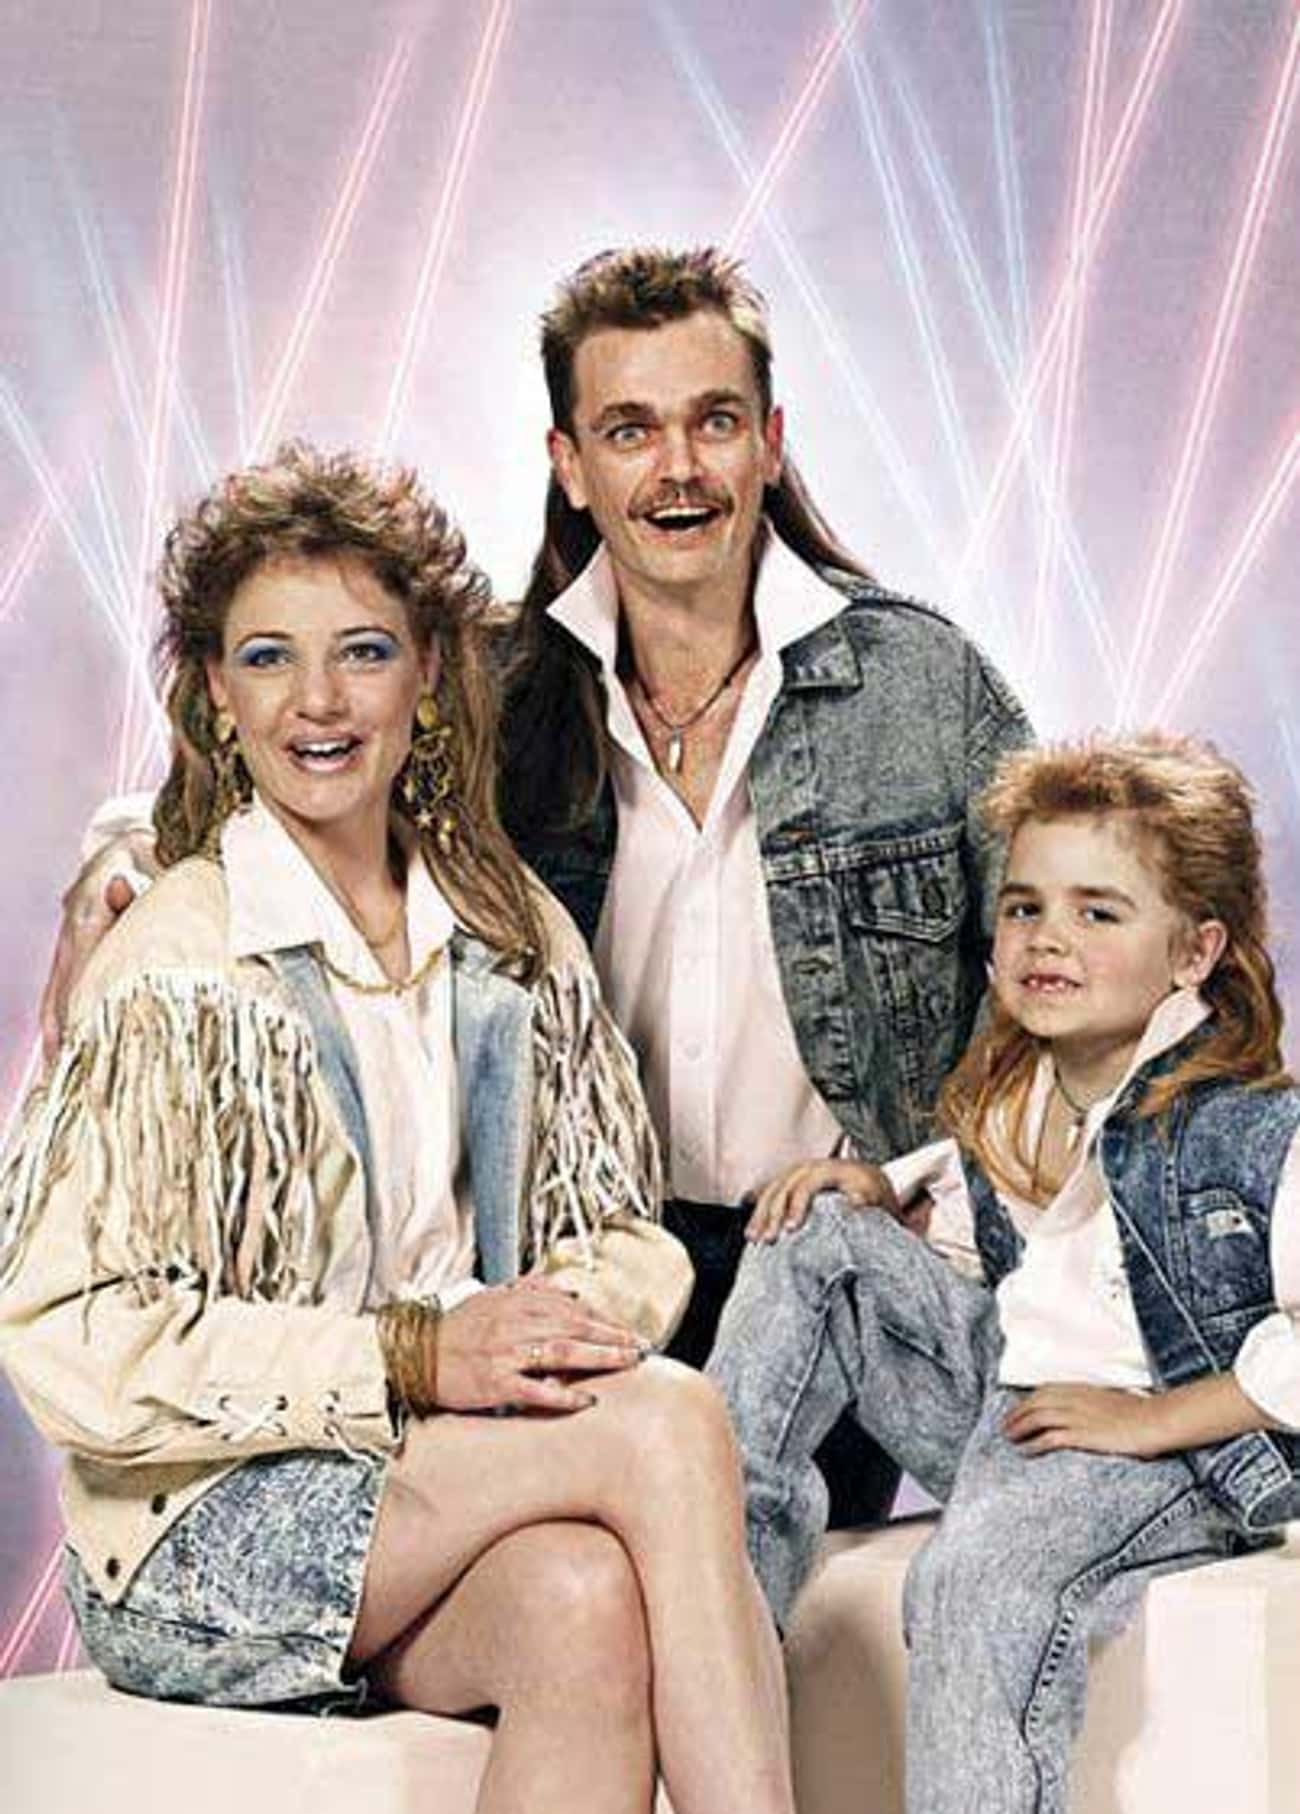 That Mullet Goes Perfectly With Your Denim Jacket